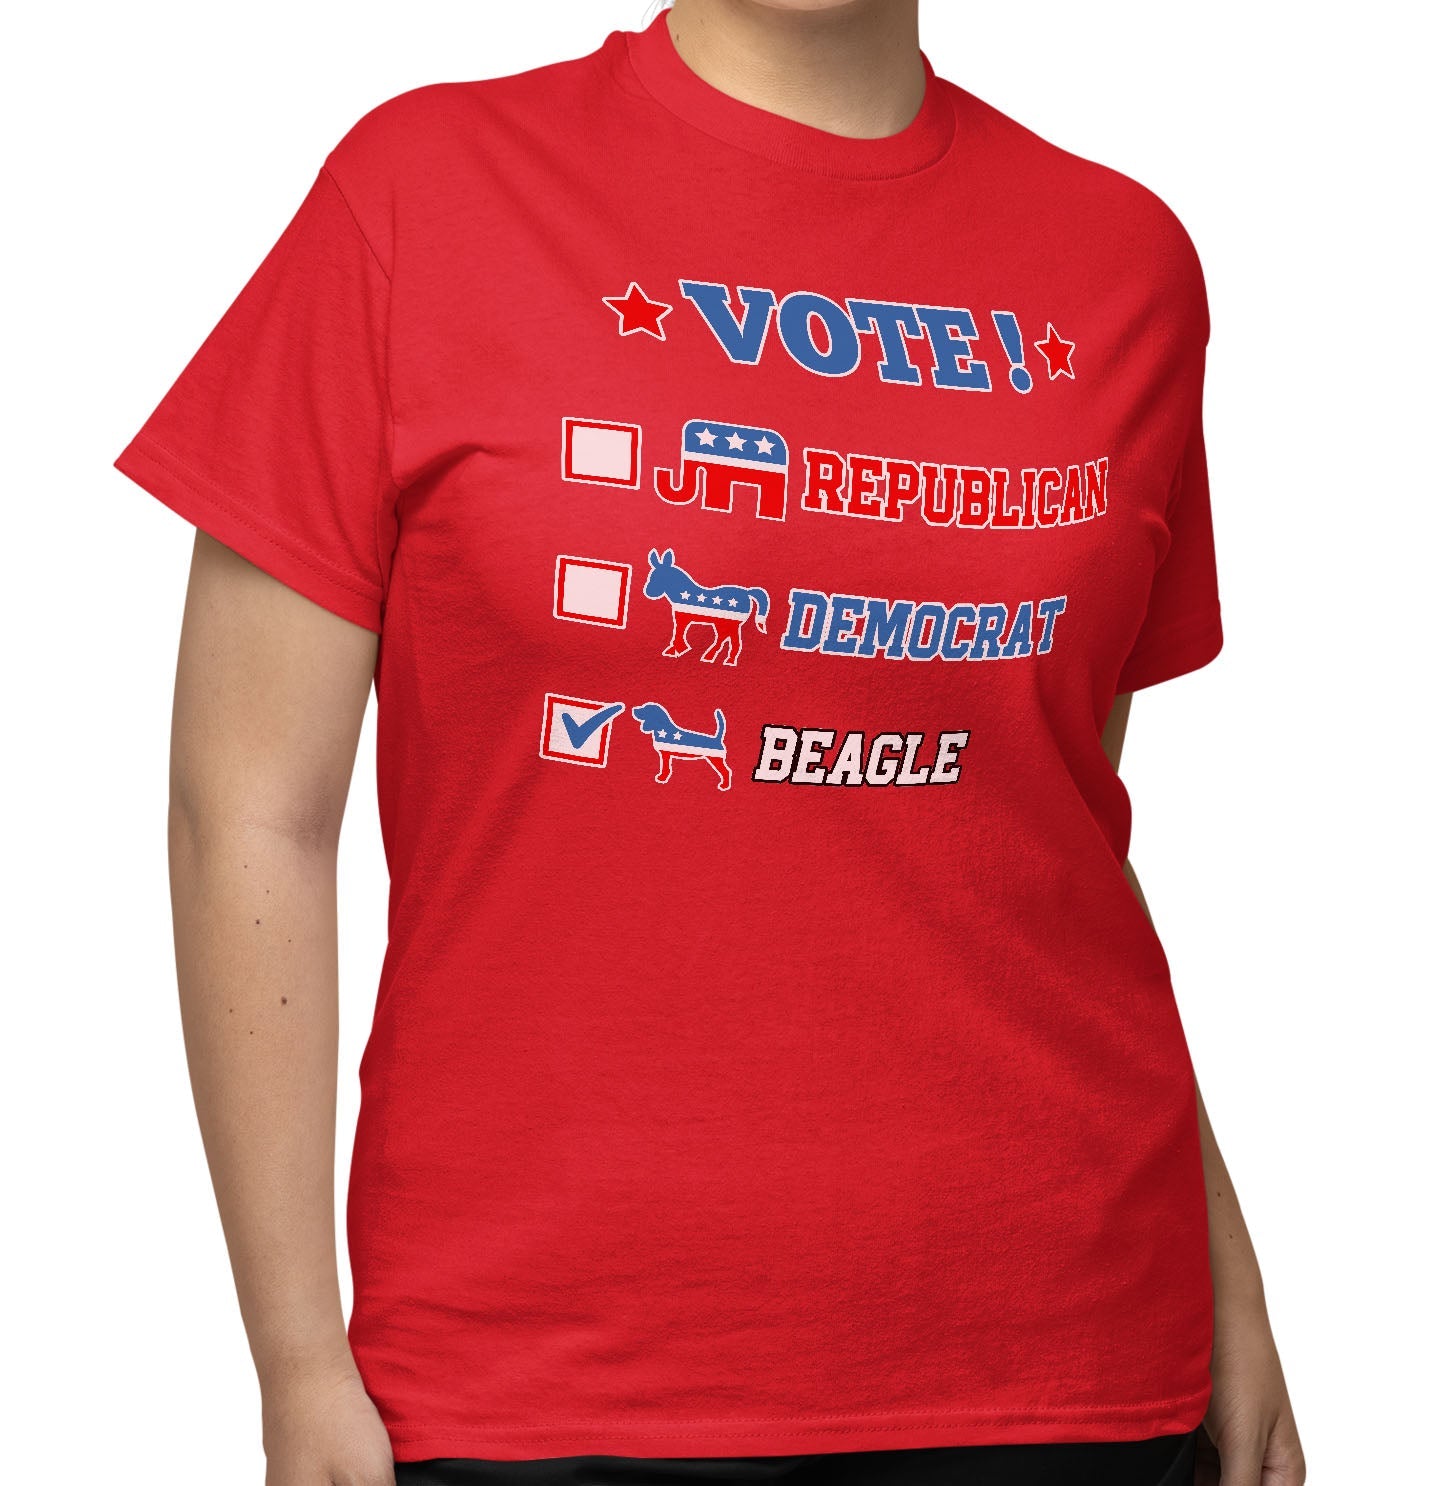 Vote for the Beagle - Adult Unisex T-Shirt